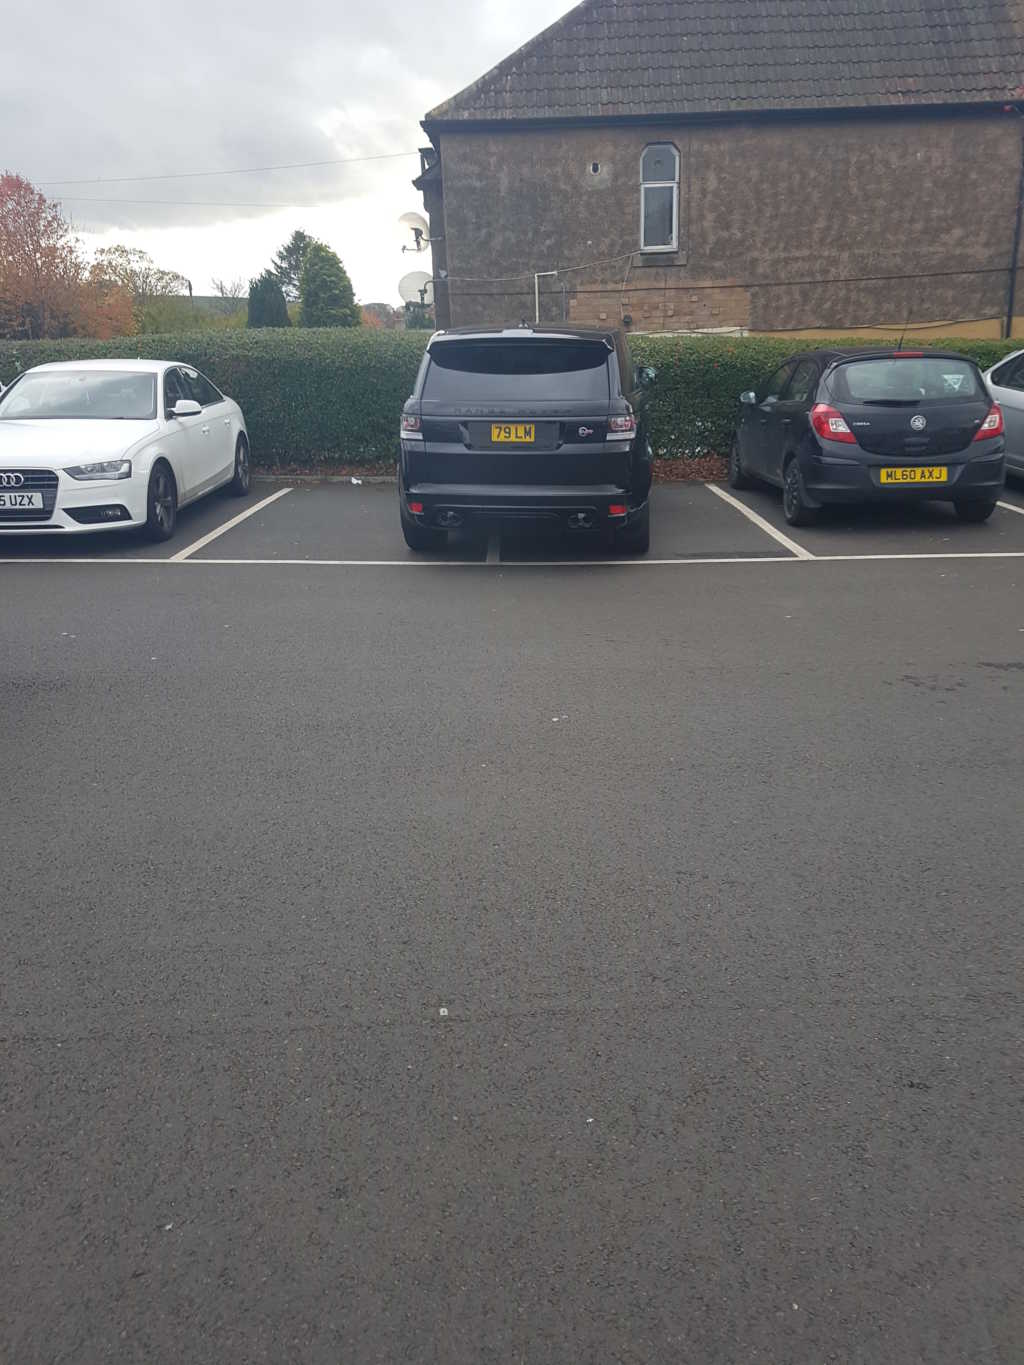 79 LM is an Inconsiderate Parker